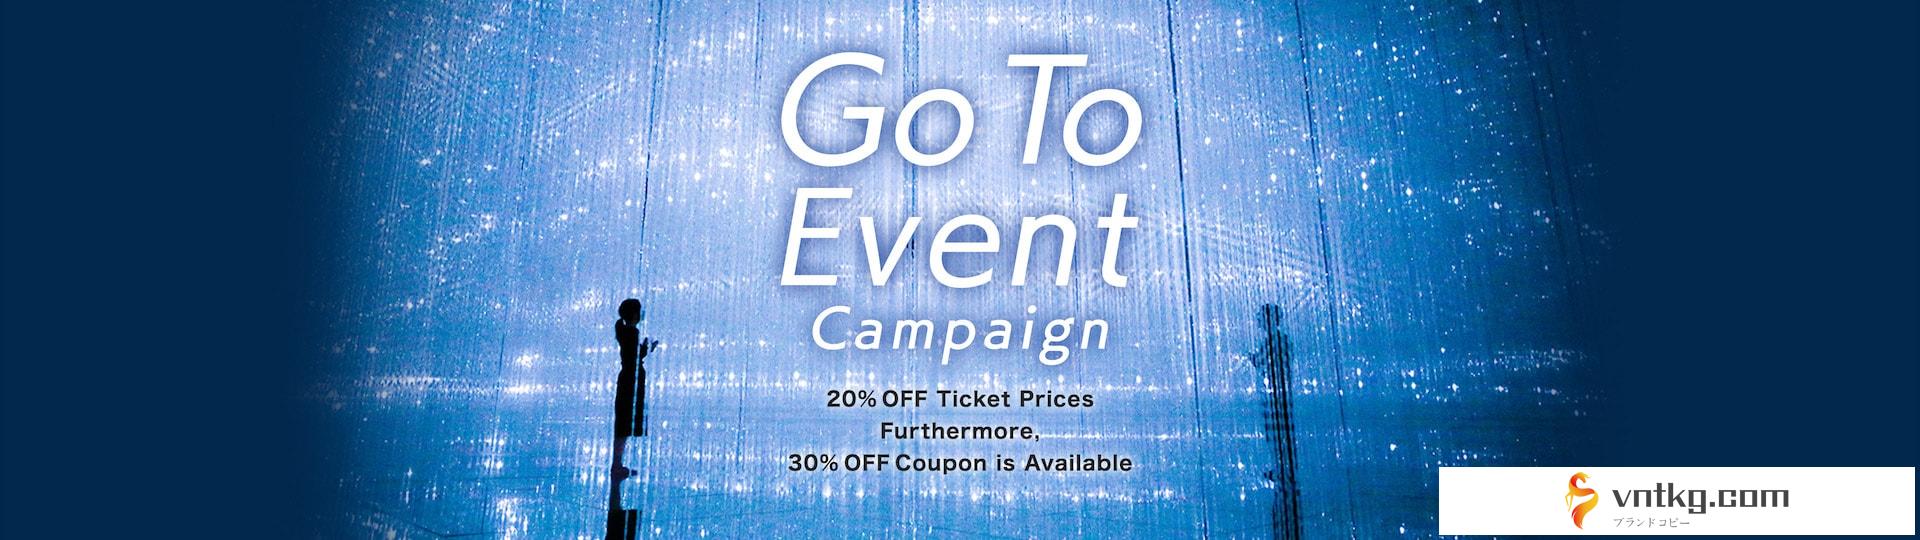 Go To Event Campaign | 20% OFF Ticket Prices Furthermore, 30% OFF Coupon is Available.